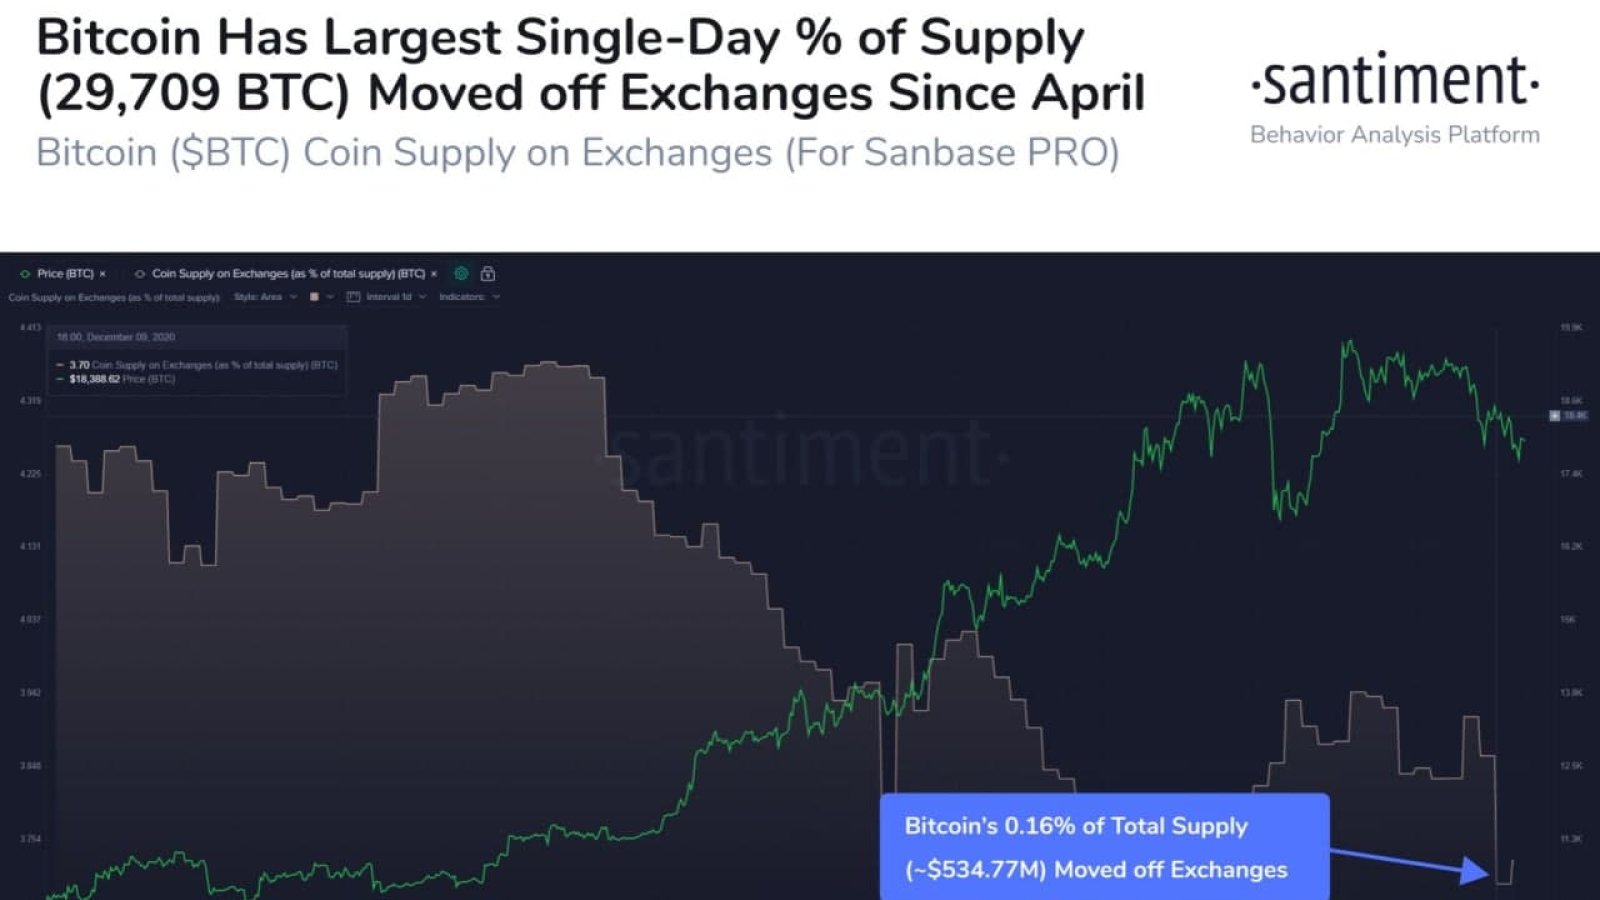 The largest single-day percentage of supply moved for Bitcoin